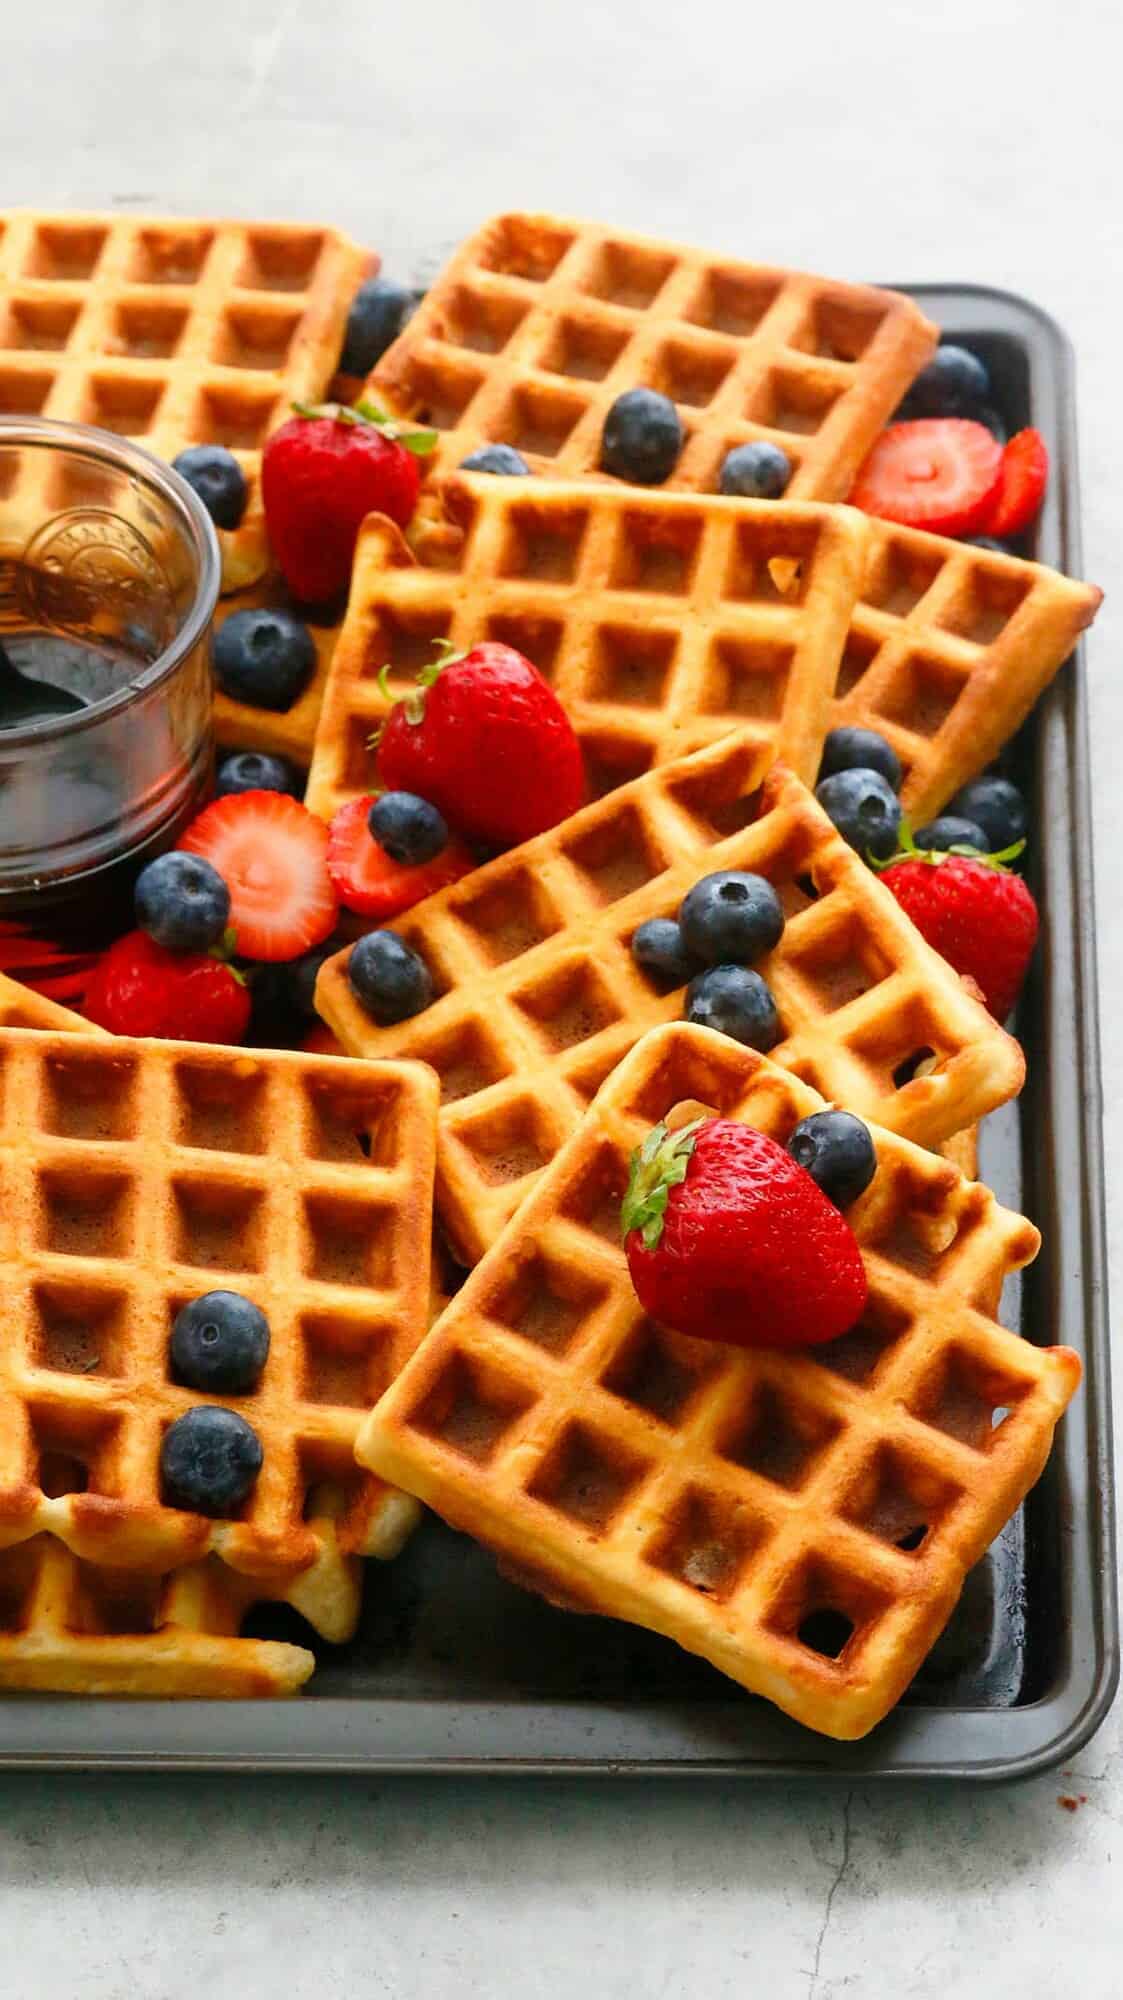 a baking sheet full of best Belgian waffles and maple syrup.